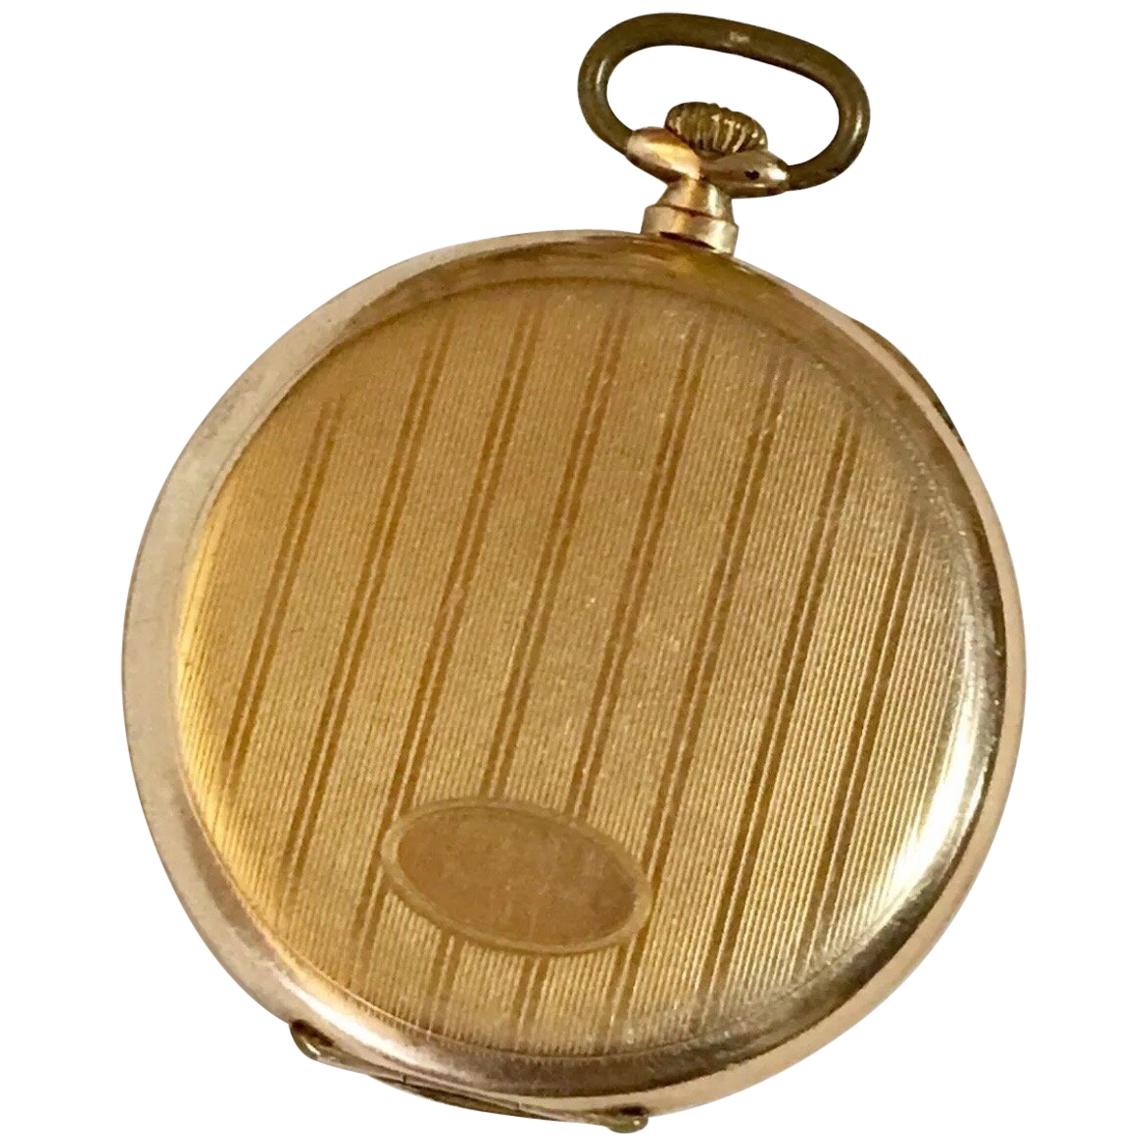 Stunning Gold-Plated Cyma Dress Pocket Watch For Sale